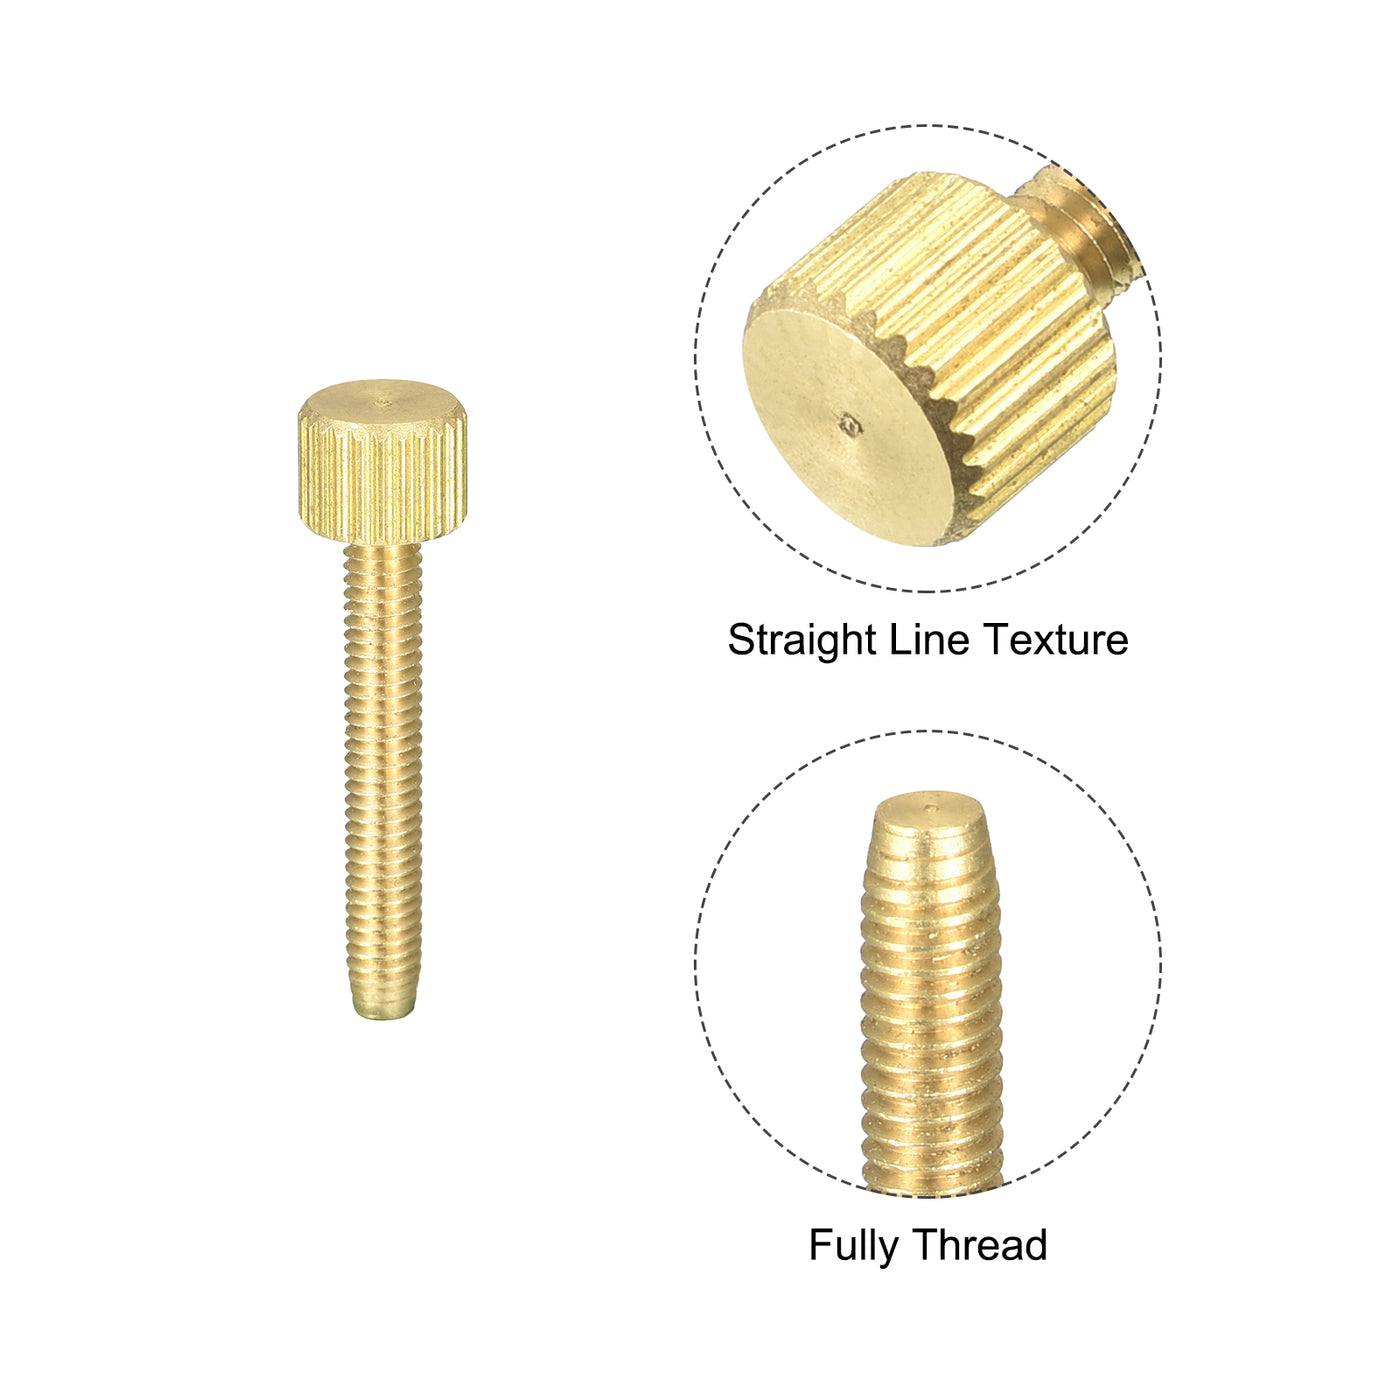 uxcell Uxcell Knurled Thumb Screws, M4x25mm Flat Brass Bolts 8mm Dia.Grip Knobs Fasteners for PC, Electronic, Mechanical 2Pcs